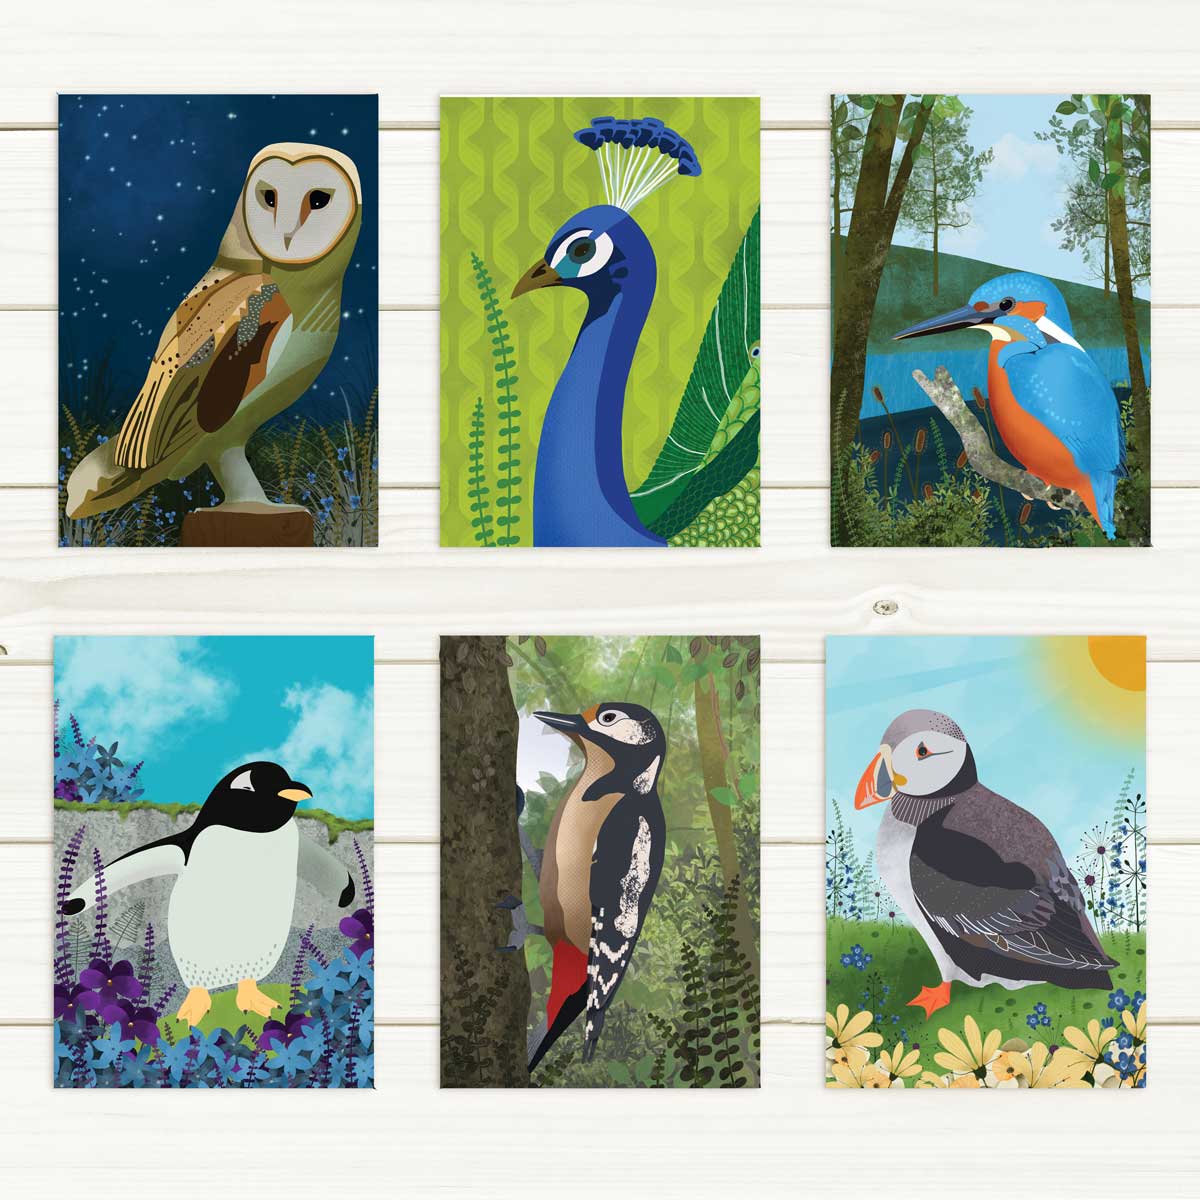 Close up view of the six cards included in the Wild Bird Pack